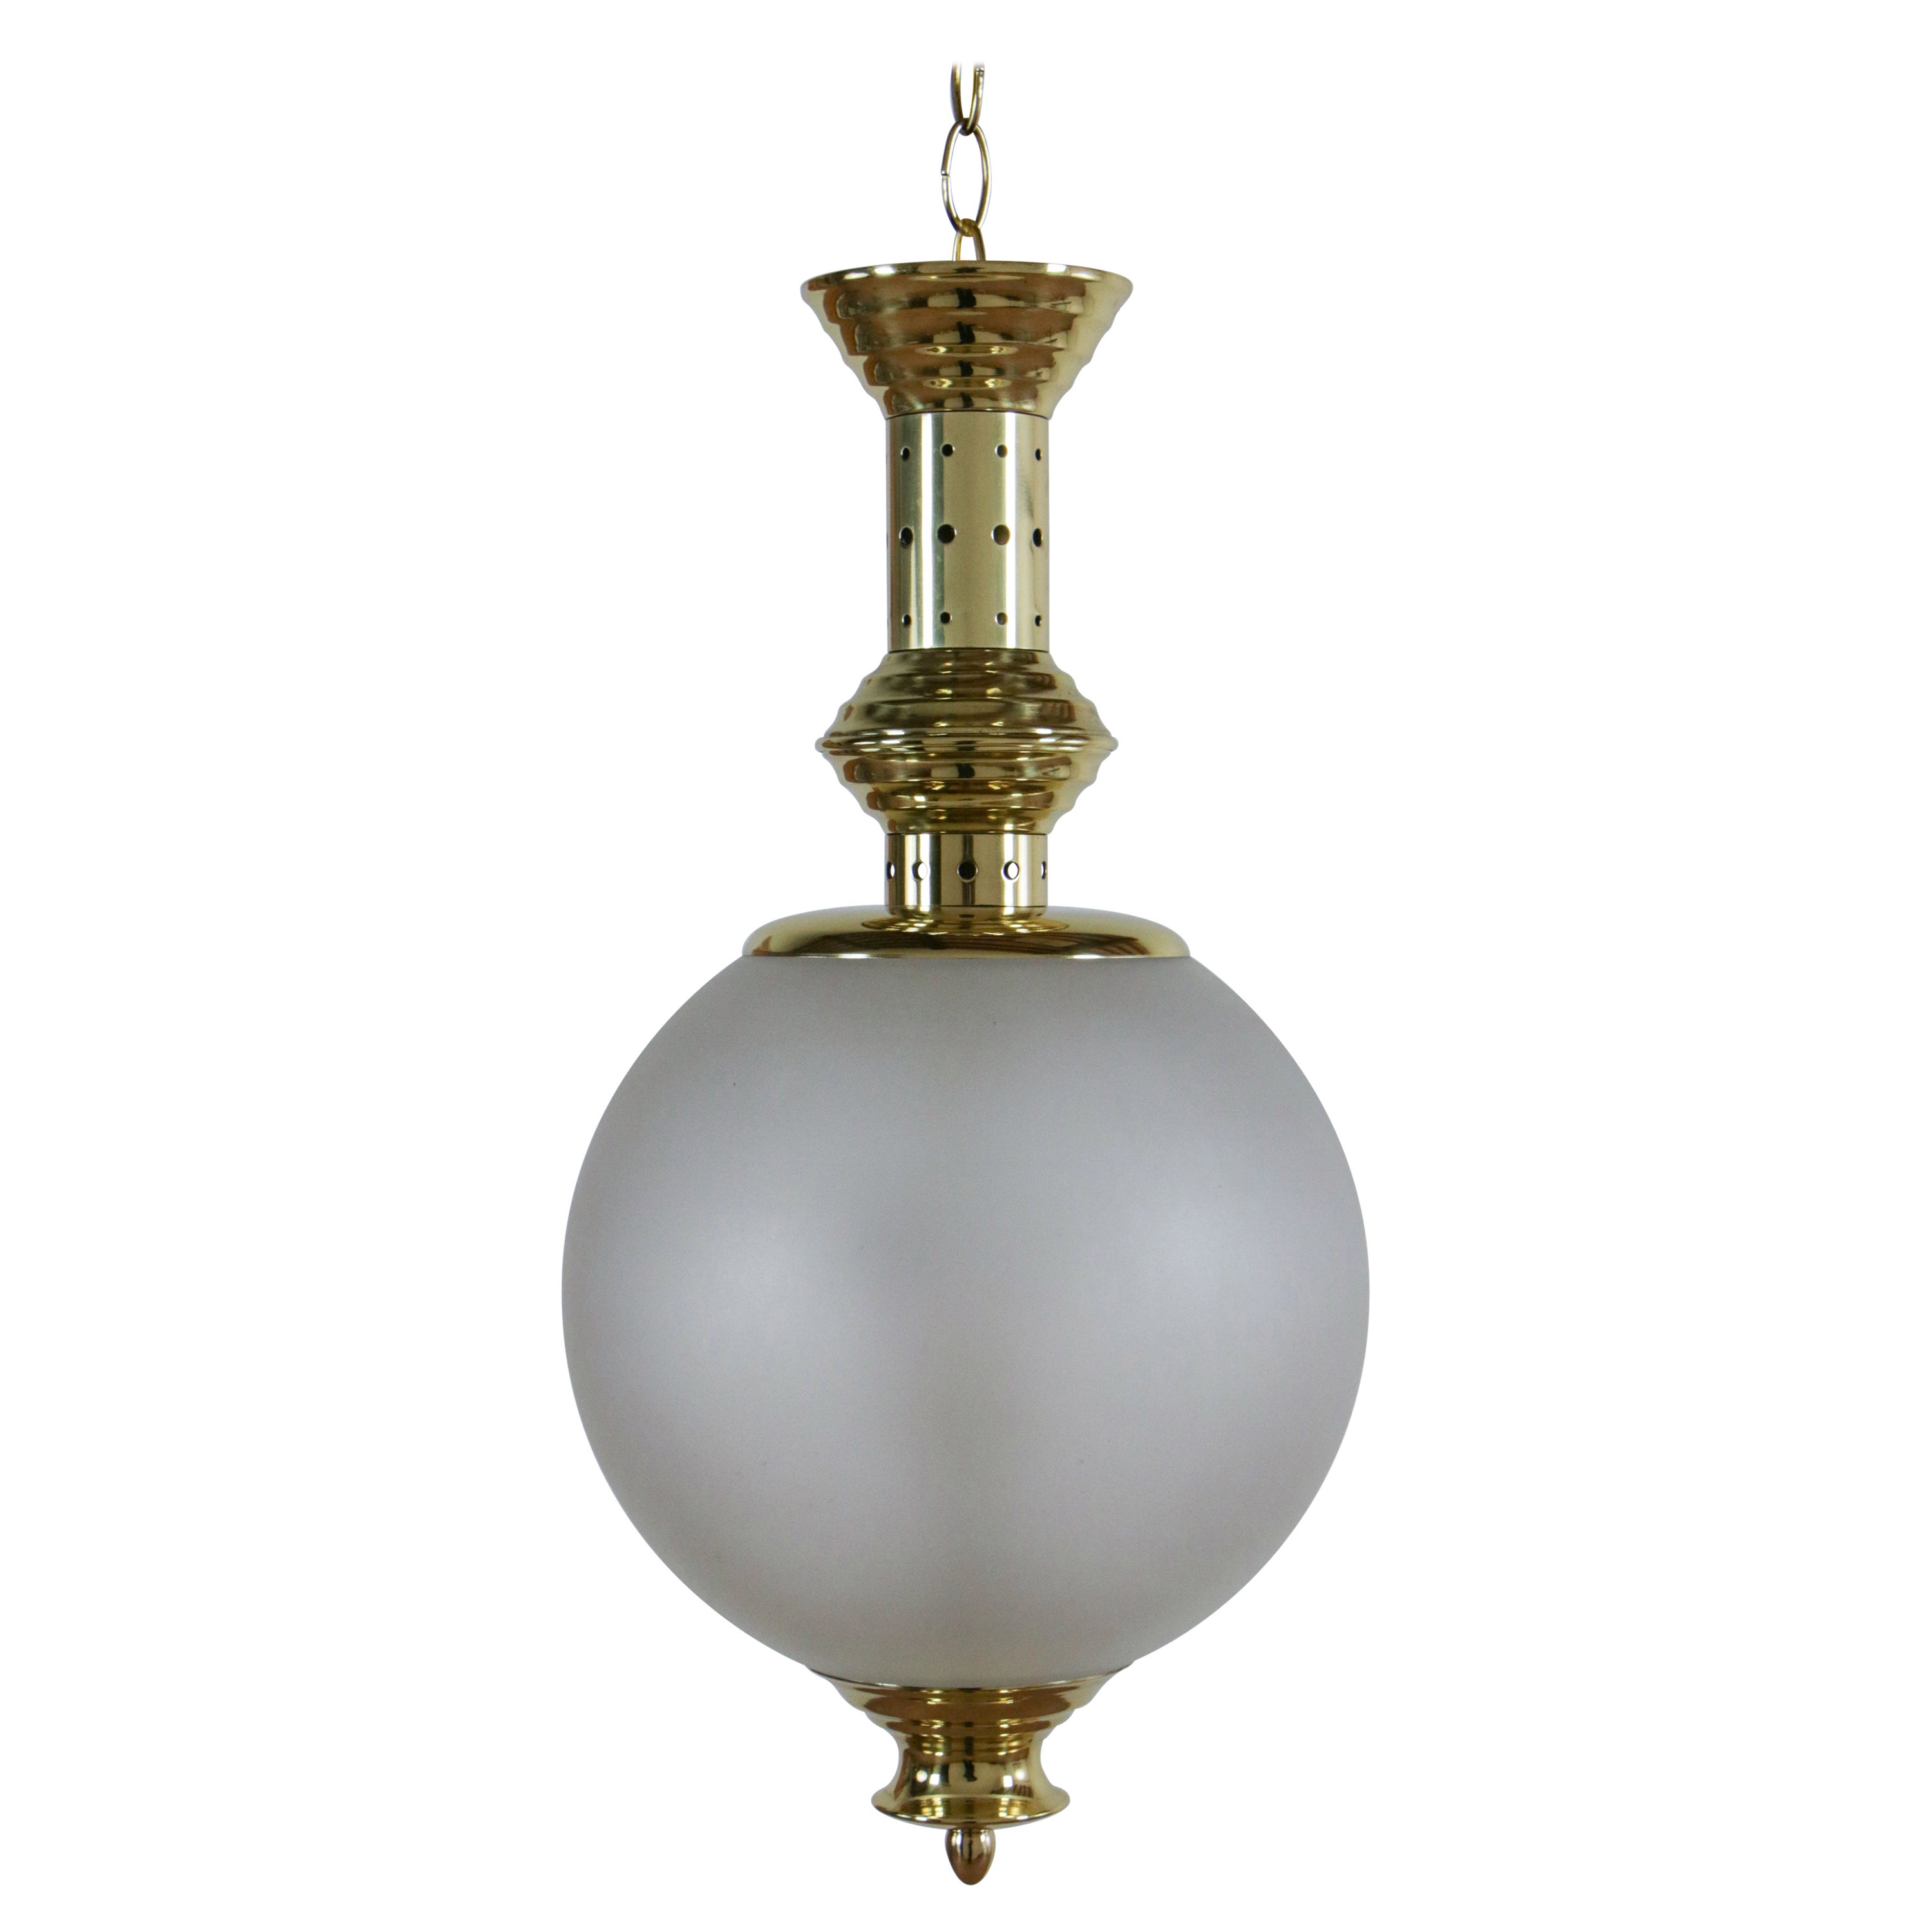 An Italian mid-century pendant lamp, Azucena style, with brass and satin glass, two light E14 formats. It has a great executive quality in the brass parts and a fantastic contrast between the polished brass and the satin glass. We recommend that you